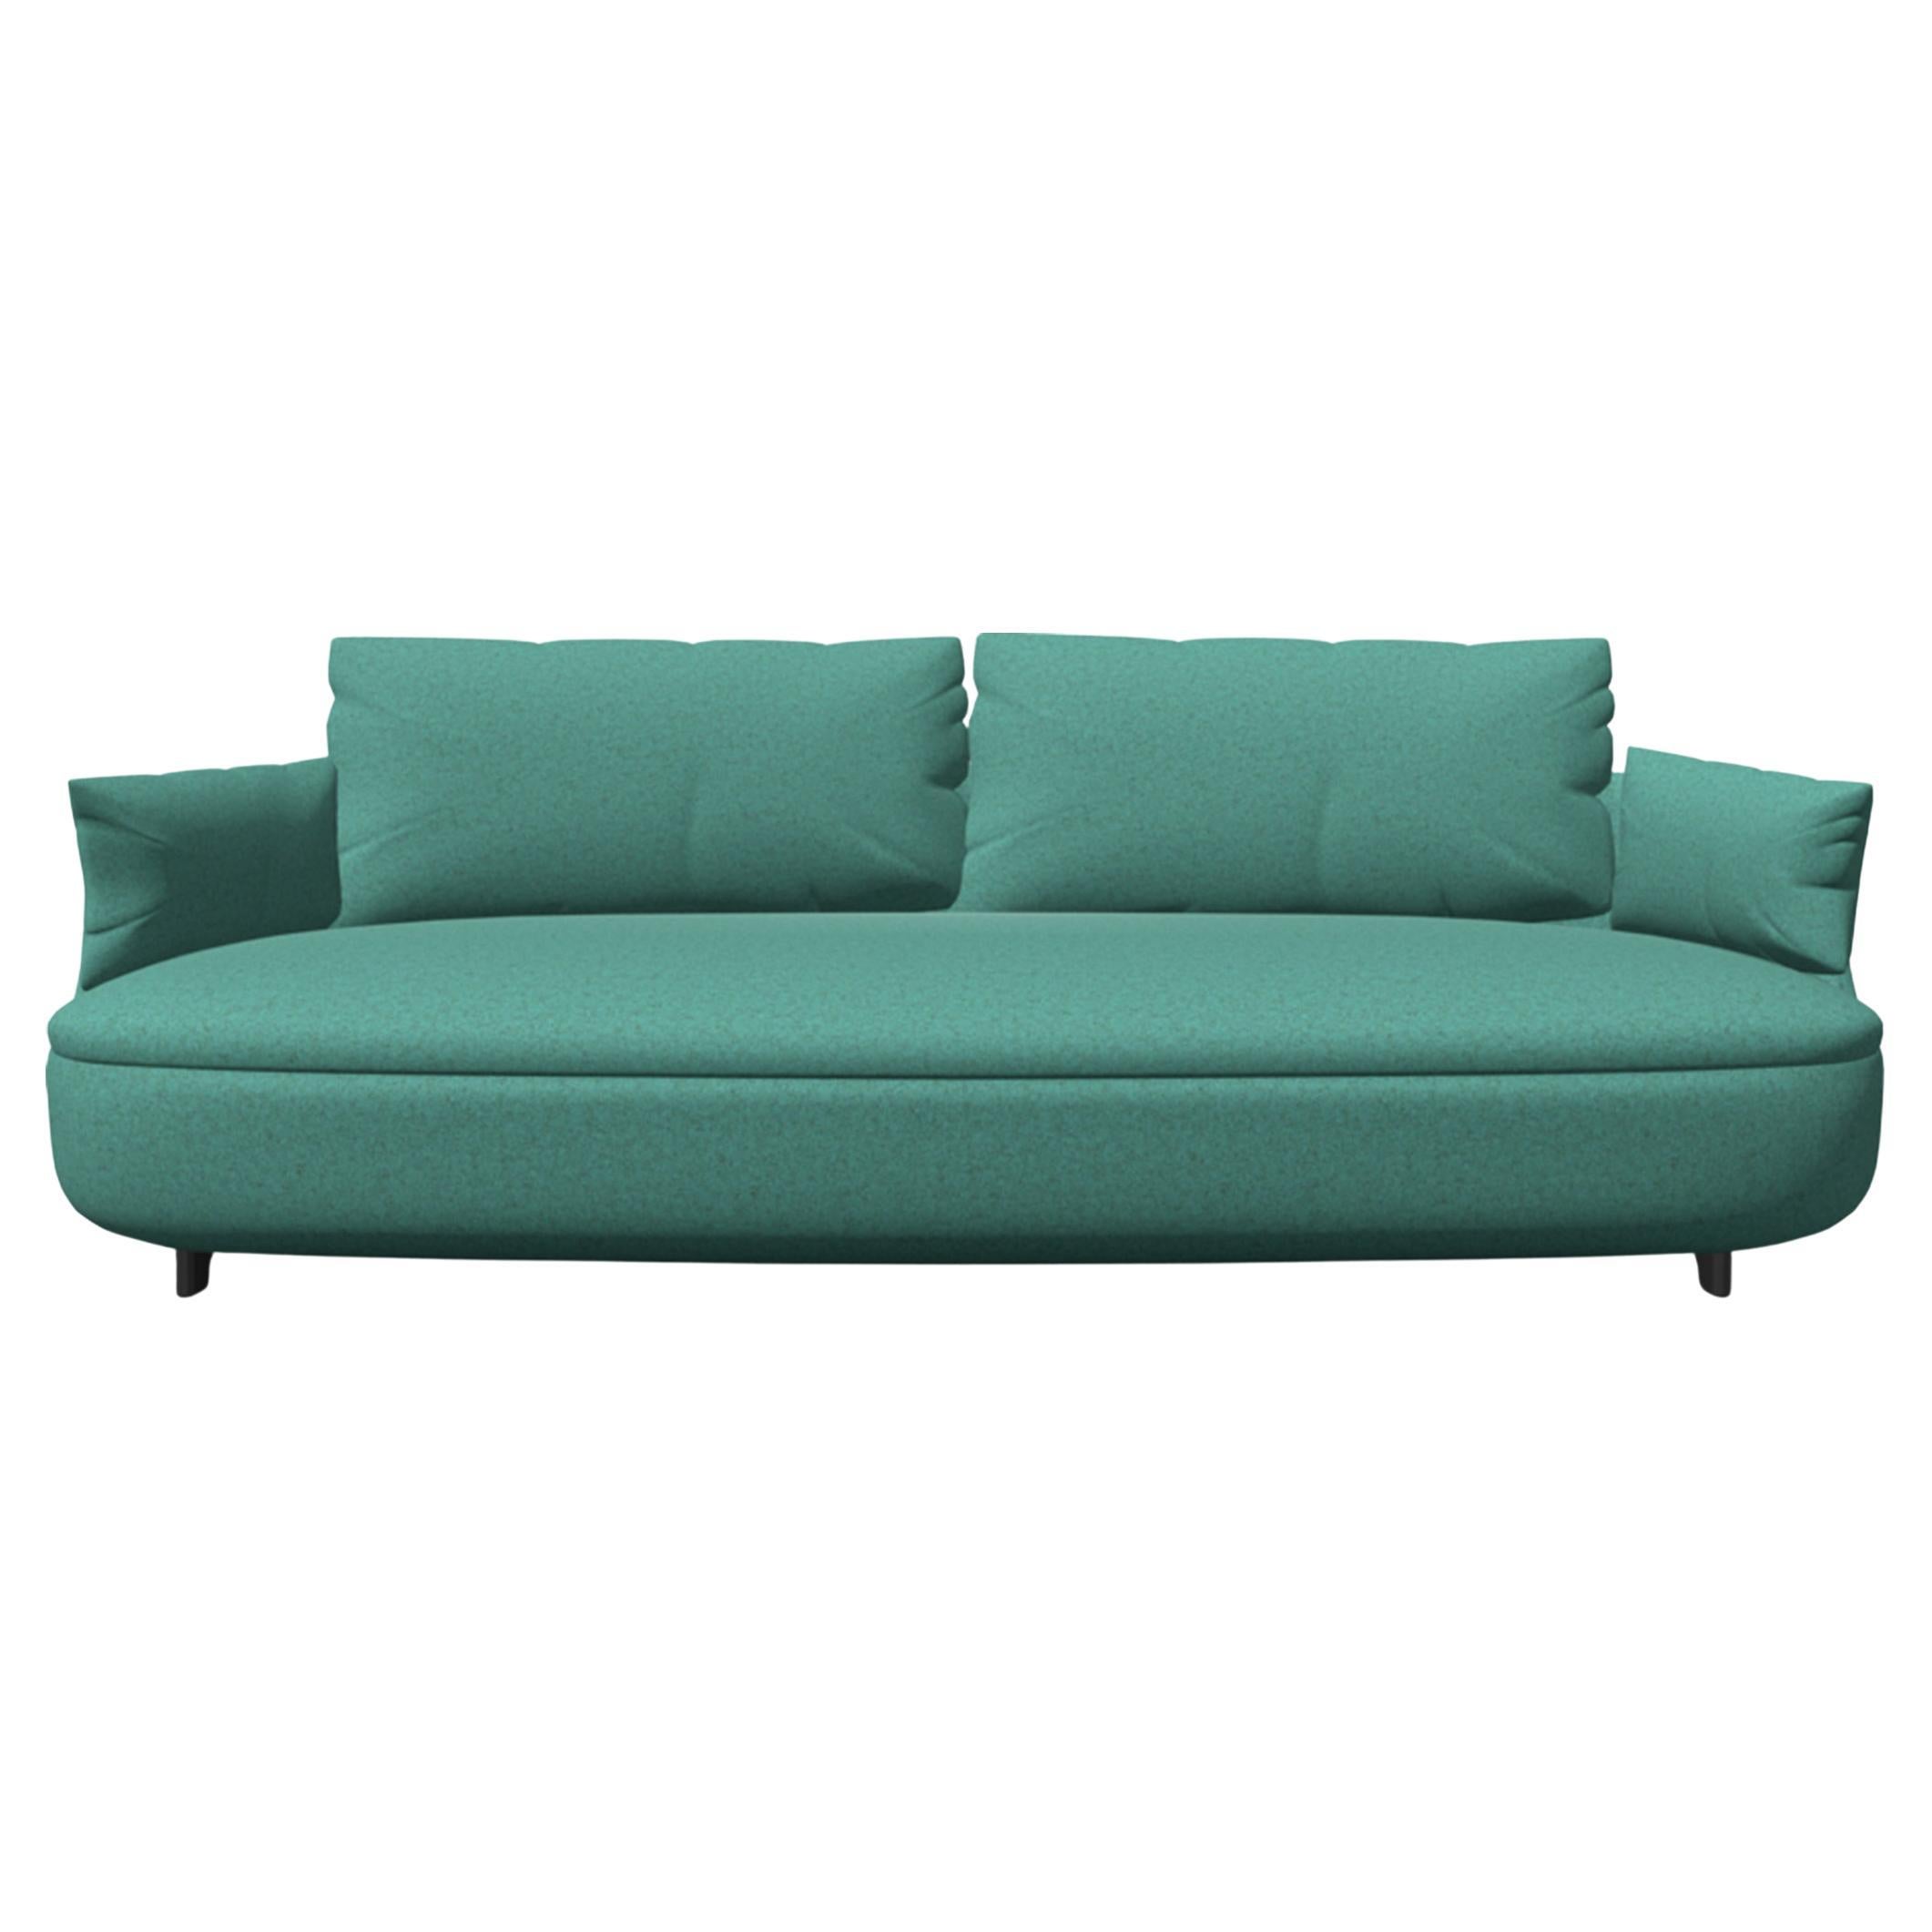 Moooi Bart Canape Sofa in Tonica 2, 933 Green Upholstery For Sale